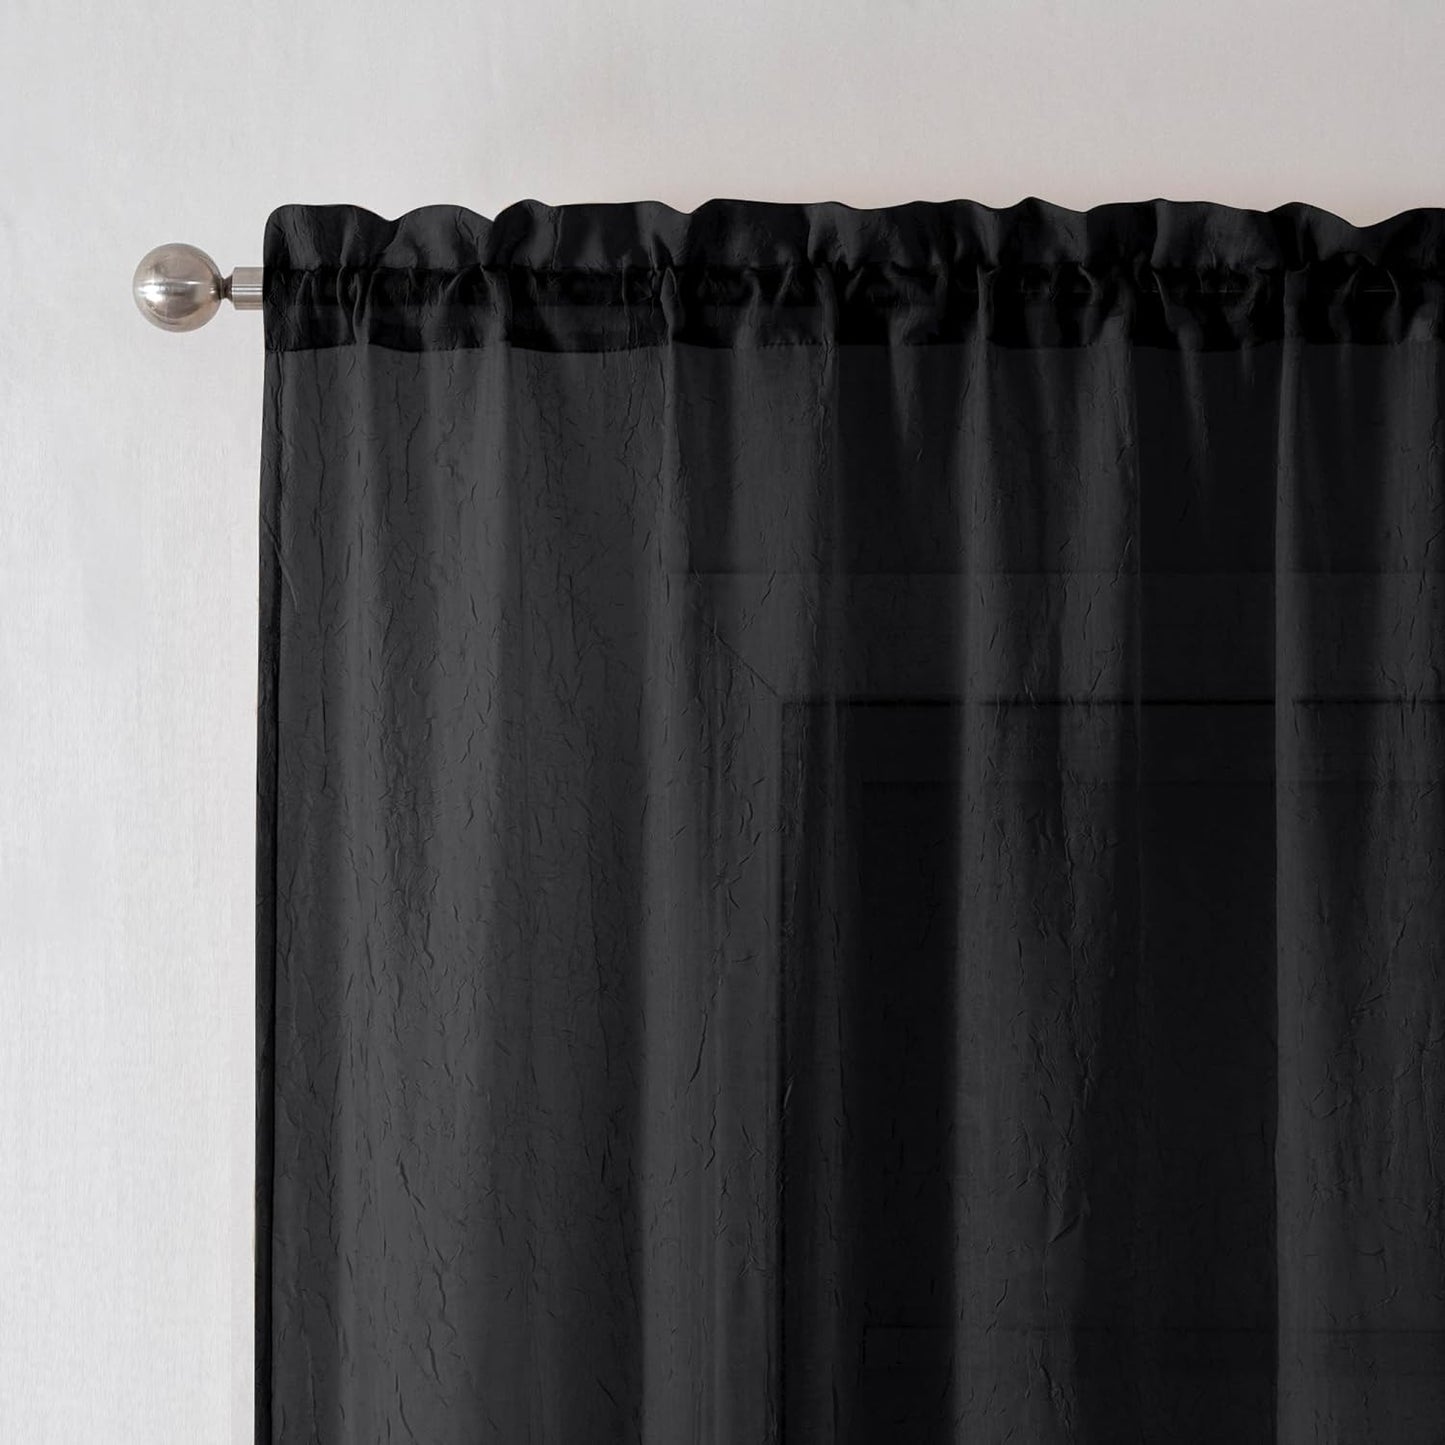 Crushed Sheer White Curtains 63 Inch Length 2 Panels, Light Filtering Solid Crinkle Voile Short Sheer Curtian for Bedroom Living Room, Each 42Wx63L Inches  Chyhomenyc Black 42 W X 24 L 